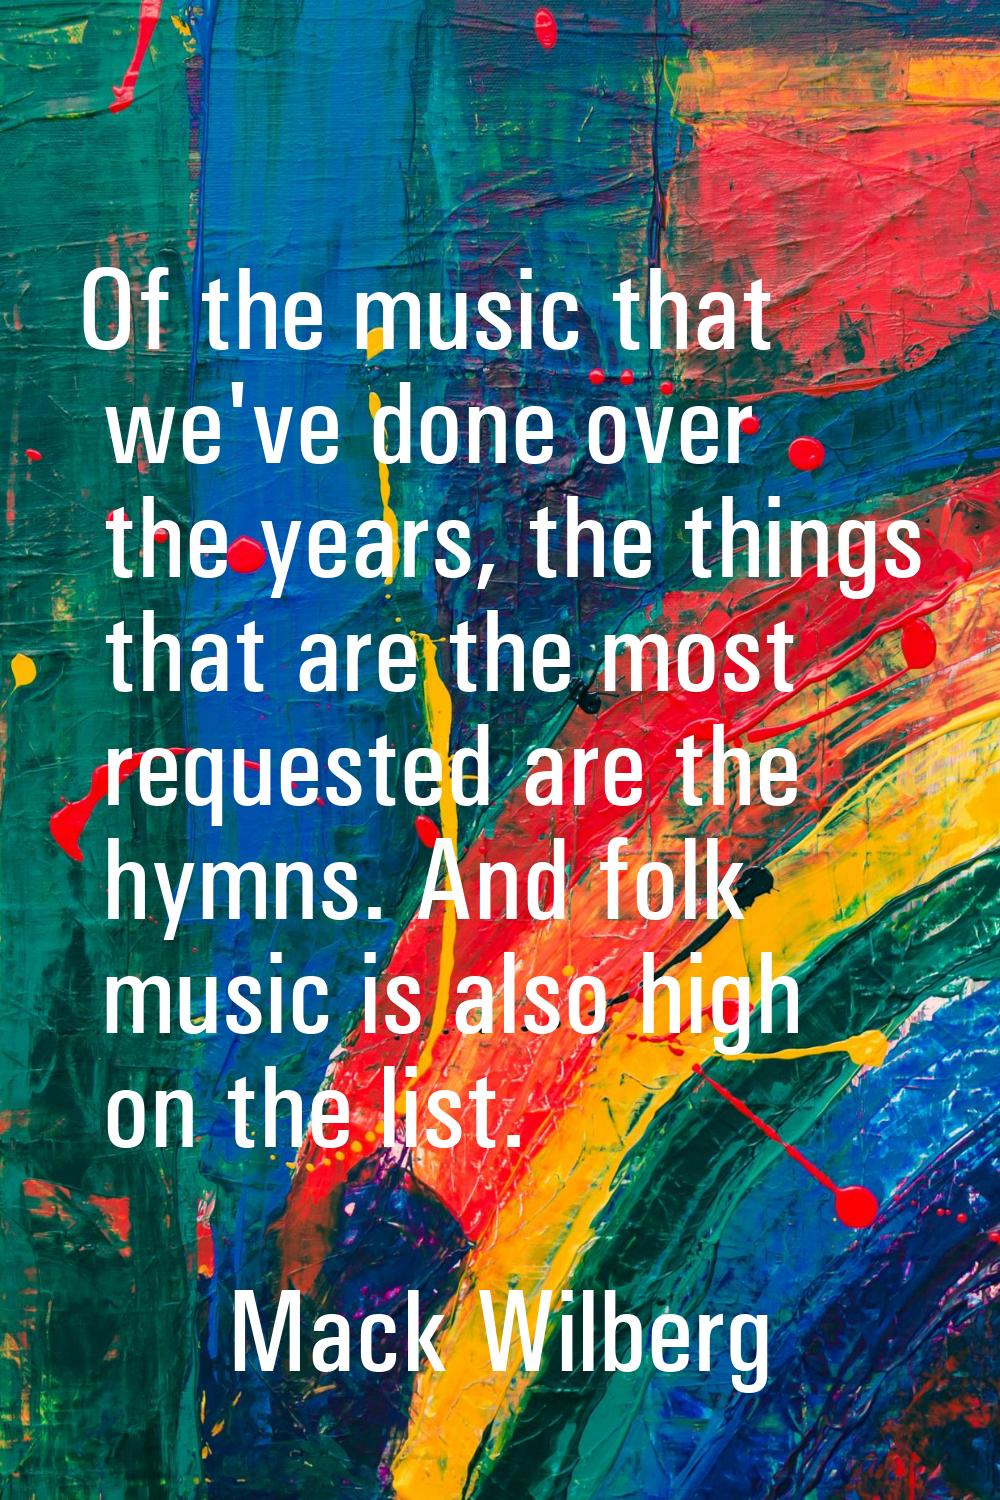 Of the music that we've done over the years, the things that are the most requested are the hymns. 